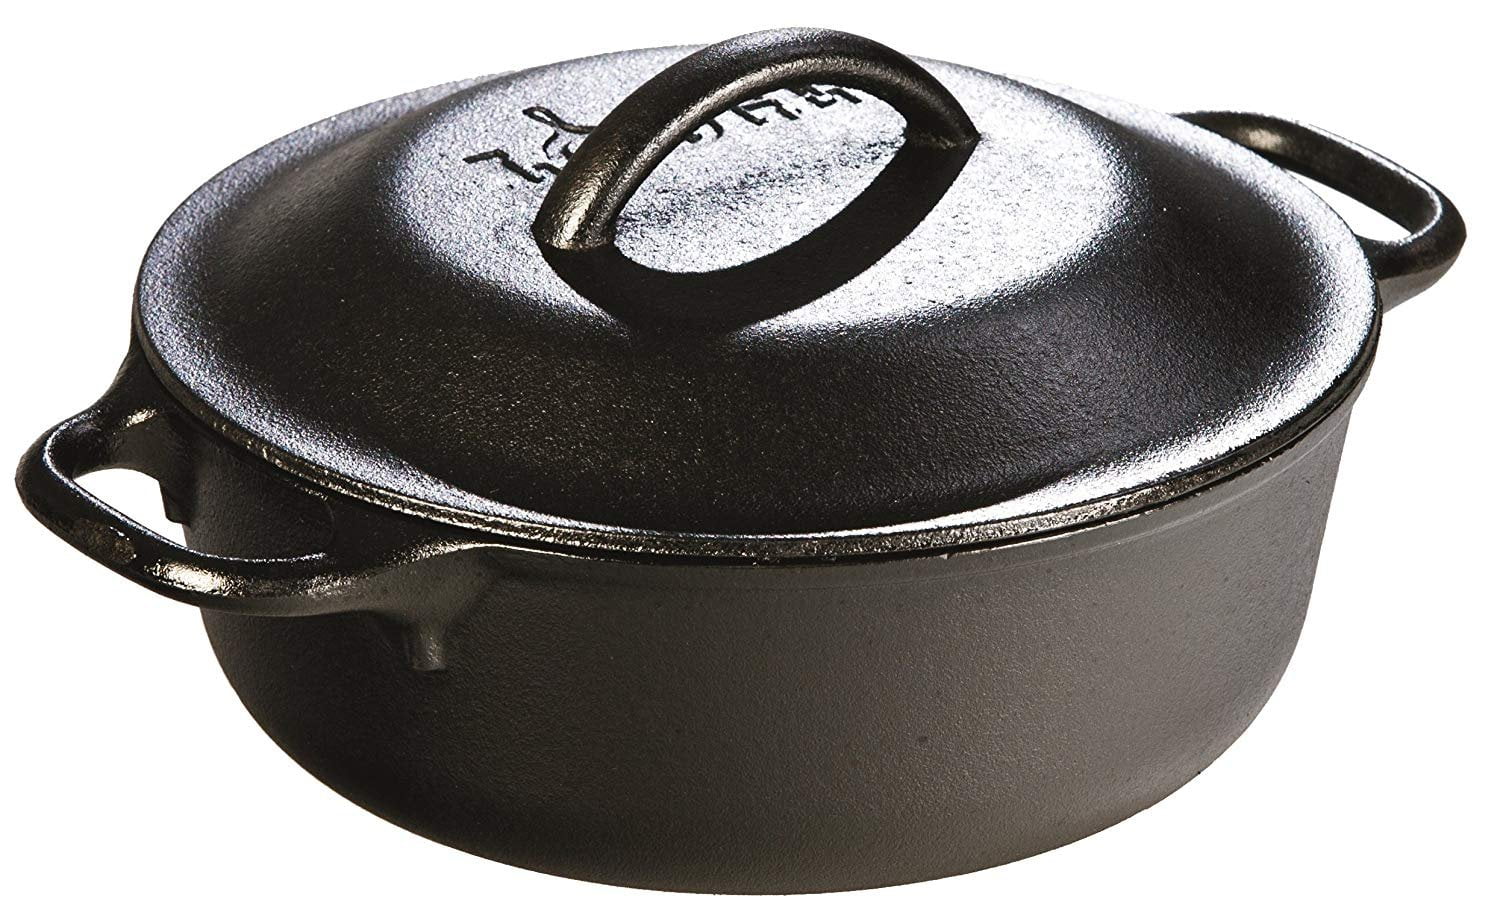  MEIGUI 5QT Cast Iron Dutch Oven, Pre-seasoned Non-Stick Dutch  Oven with Lid & Lifter Handle, Round Large Dutch Oven Liners Camp Cookware  Pot for Camping Cooking, BBQ, Basting, Baking, Black: Home